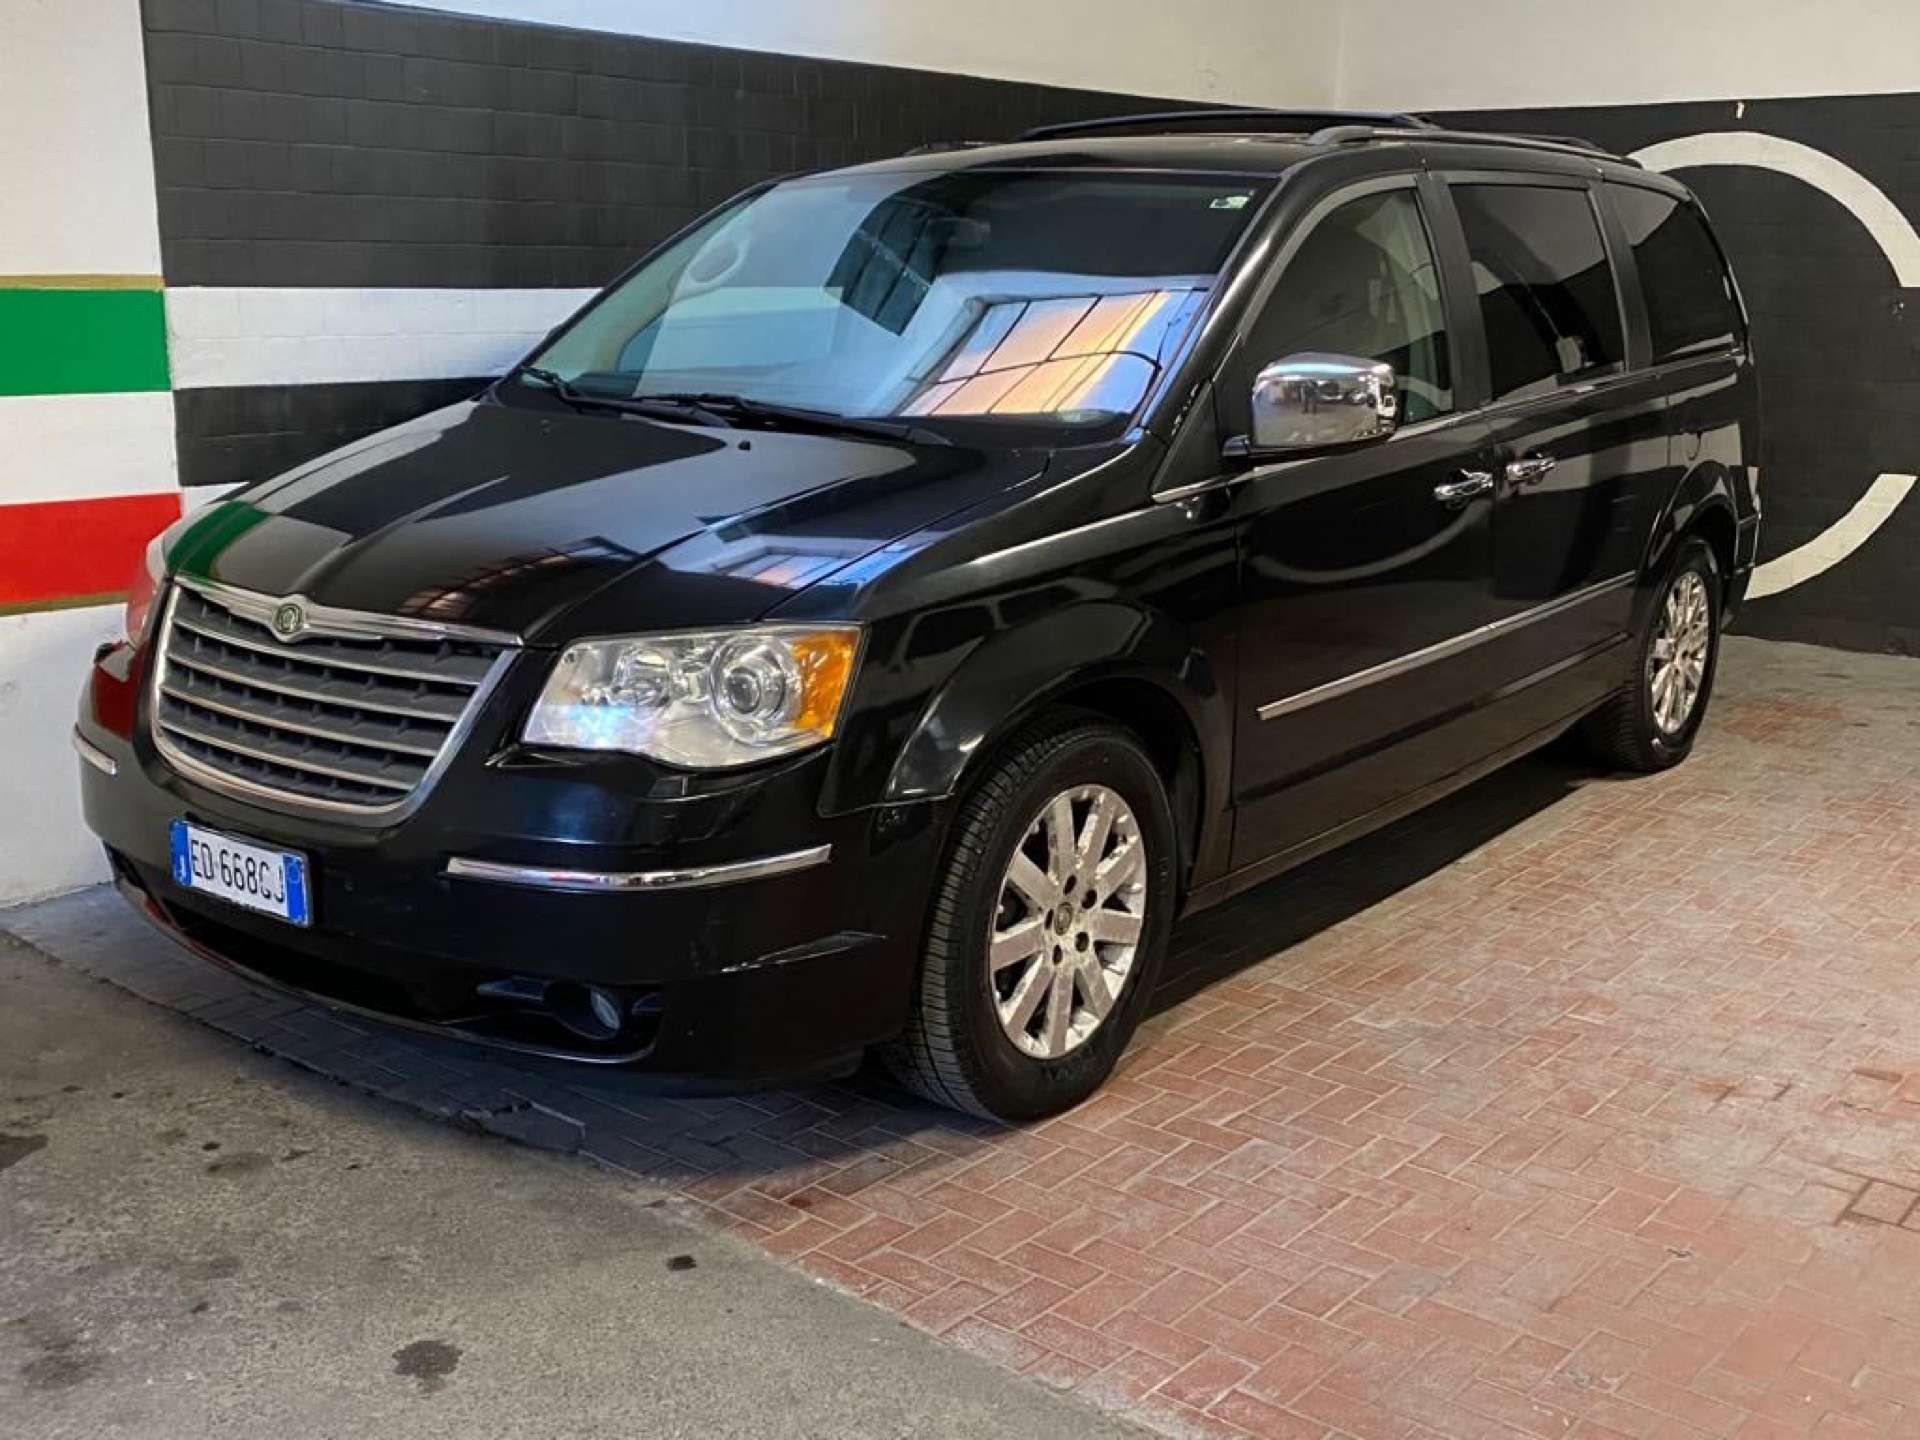 Chrysler Grand Voyager Van in Blue used in Roma for € 7,900.-